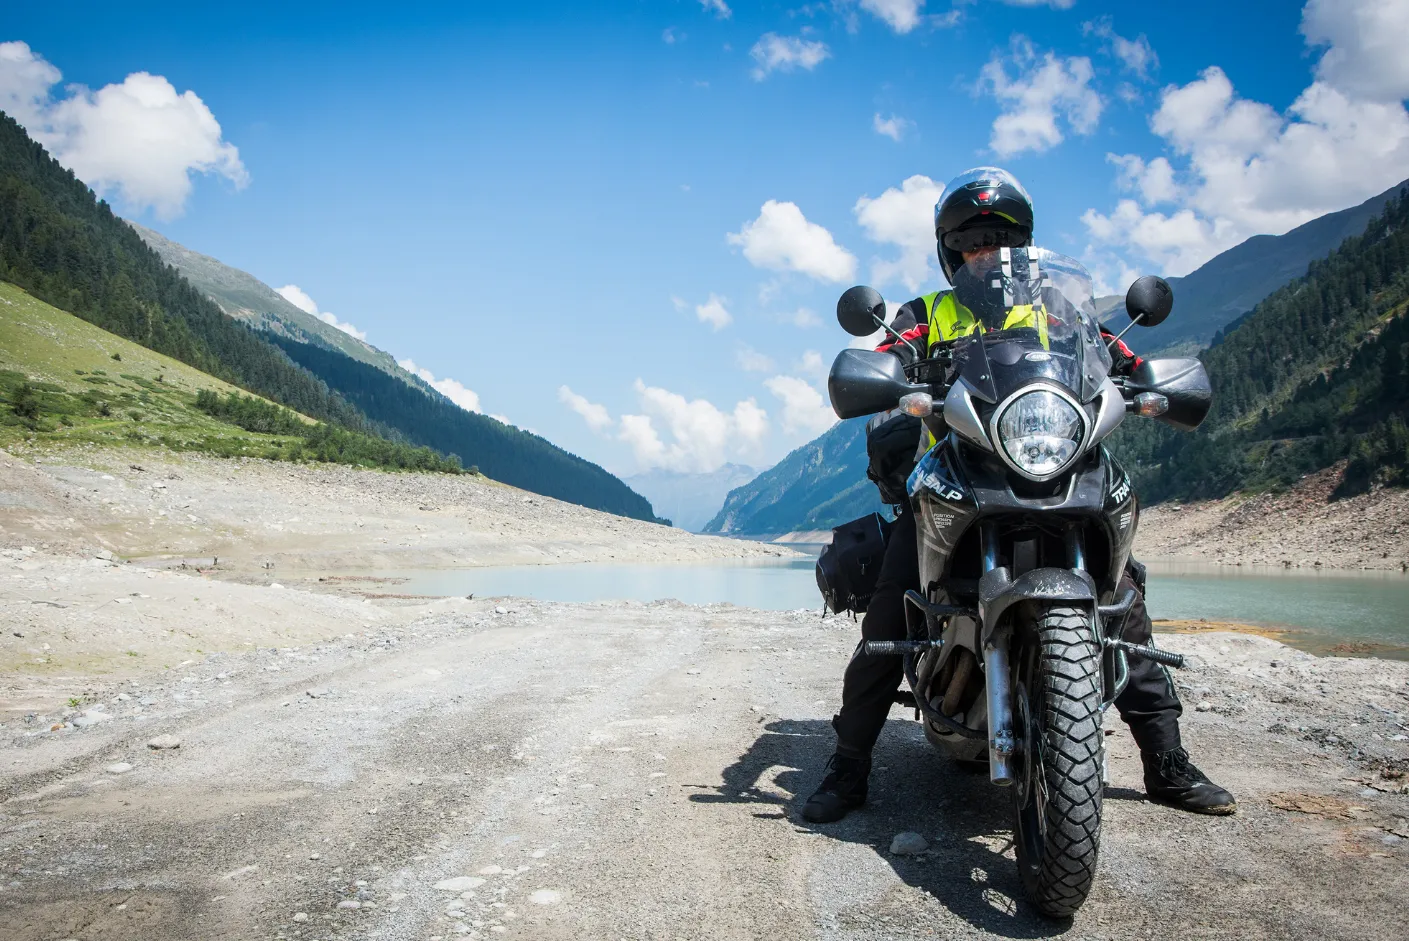 Here is a Study guide of motorcycle knowledge test practice of Canada